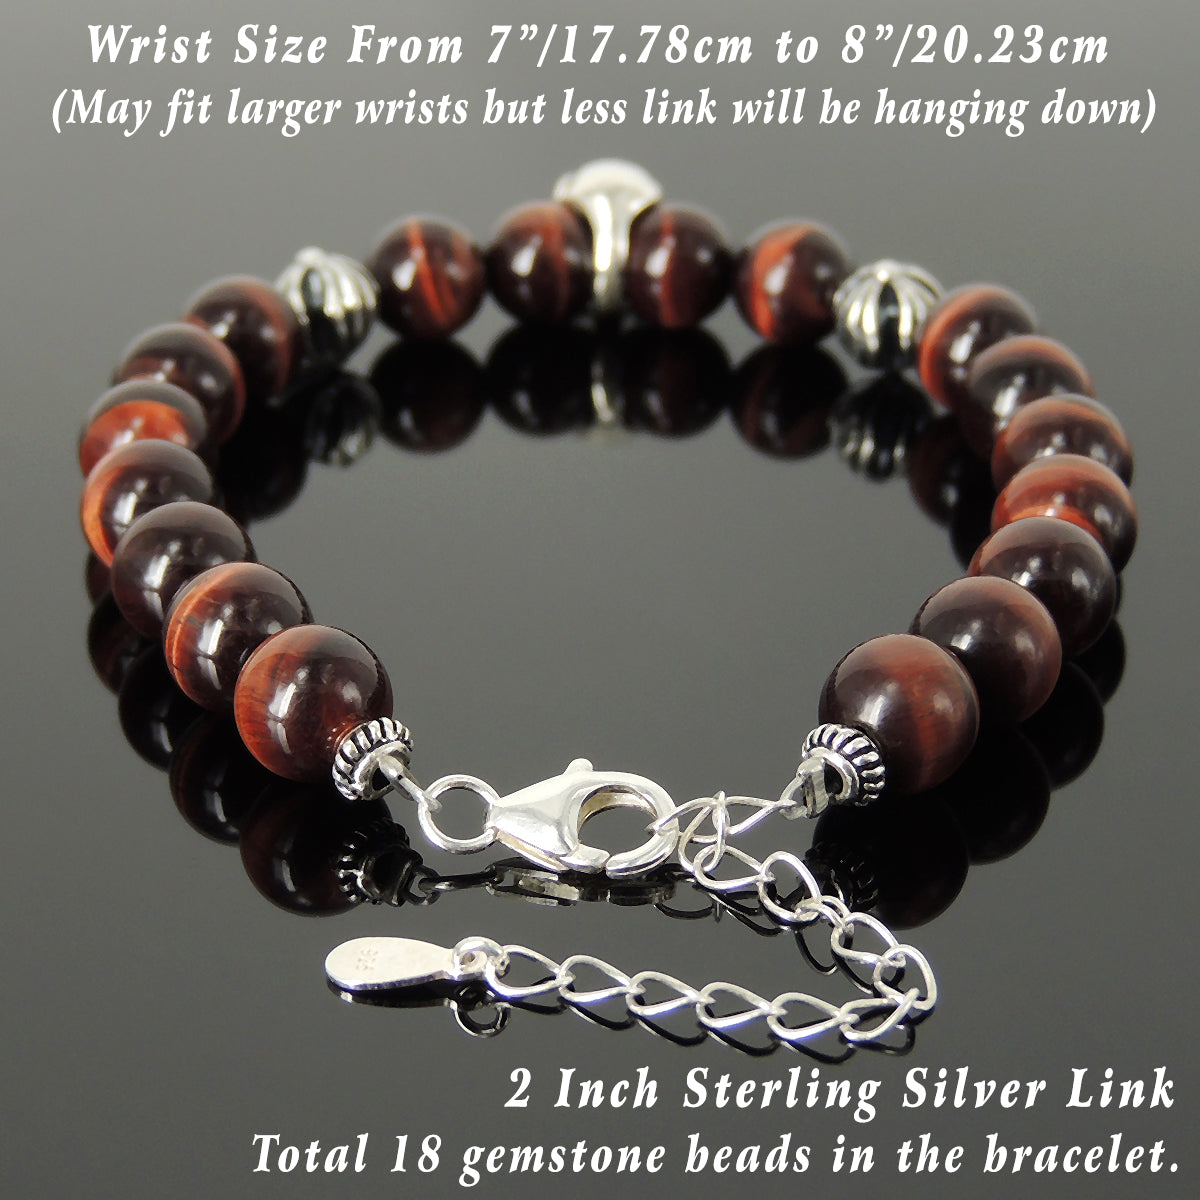 Handmade Spiritual Skull & Cross Clasp Bracelet with Healing 8mm Red Tiger Eye Gemstones with Genuine S925 Sterling Silver Parts - BR1469